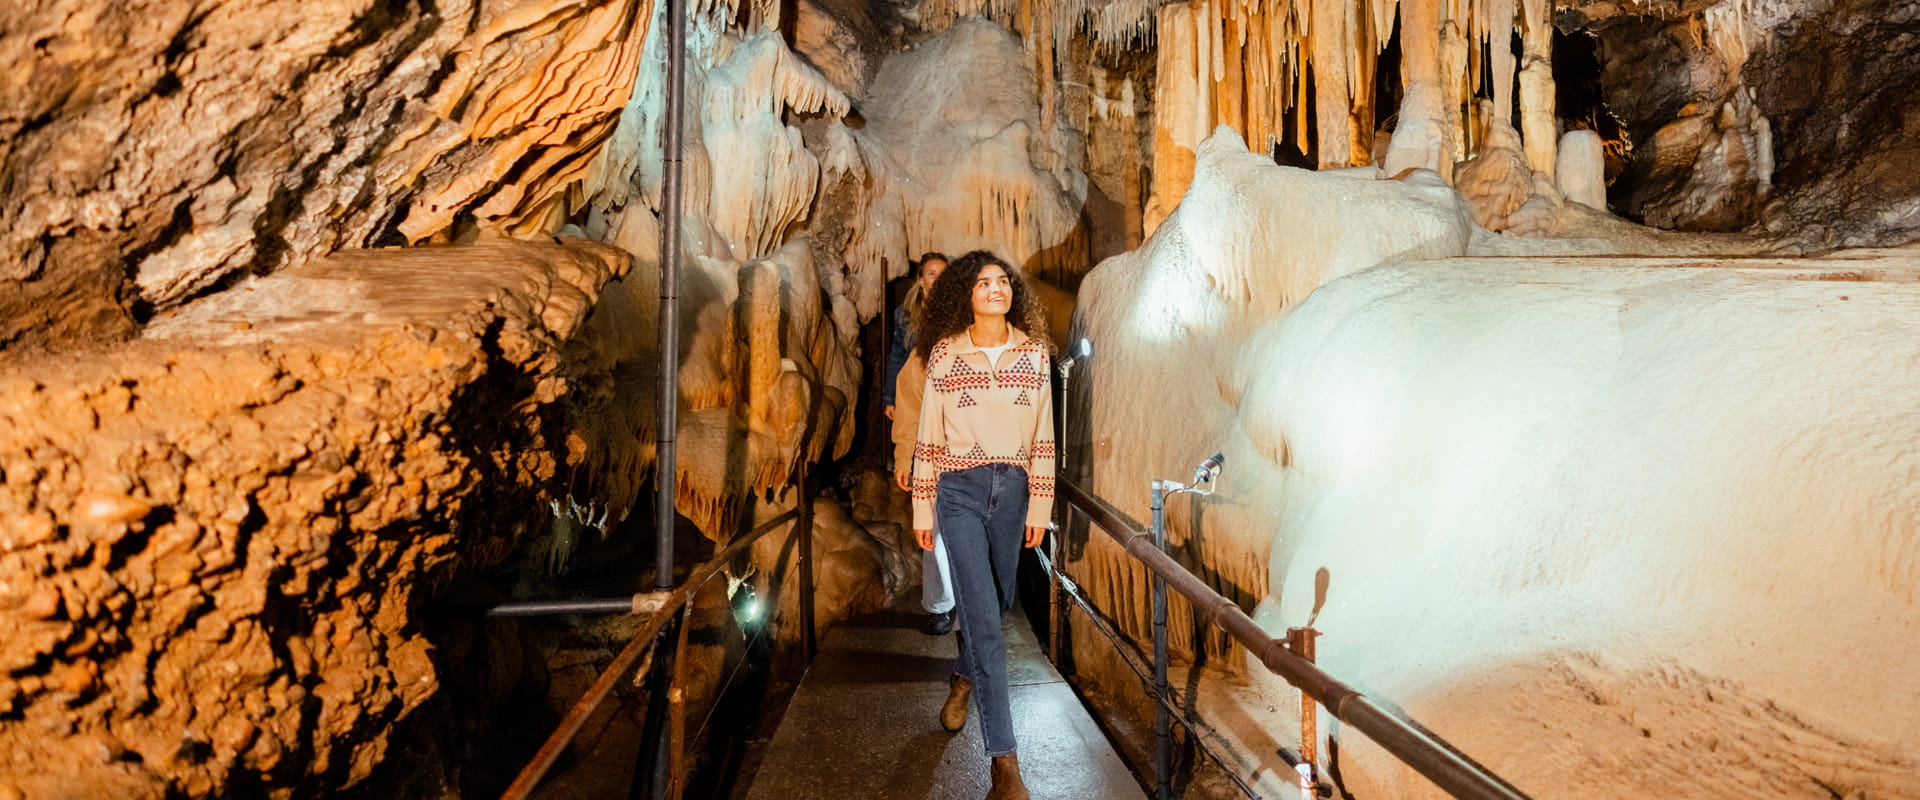 A young woman looking up to admire the surrounding limestone stalactite formations inside a cave.